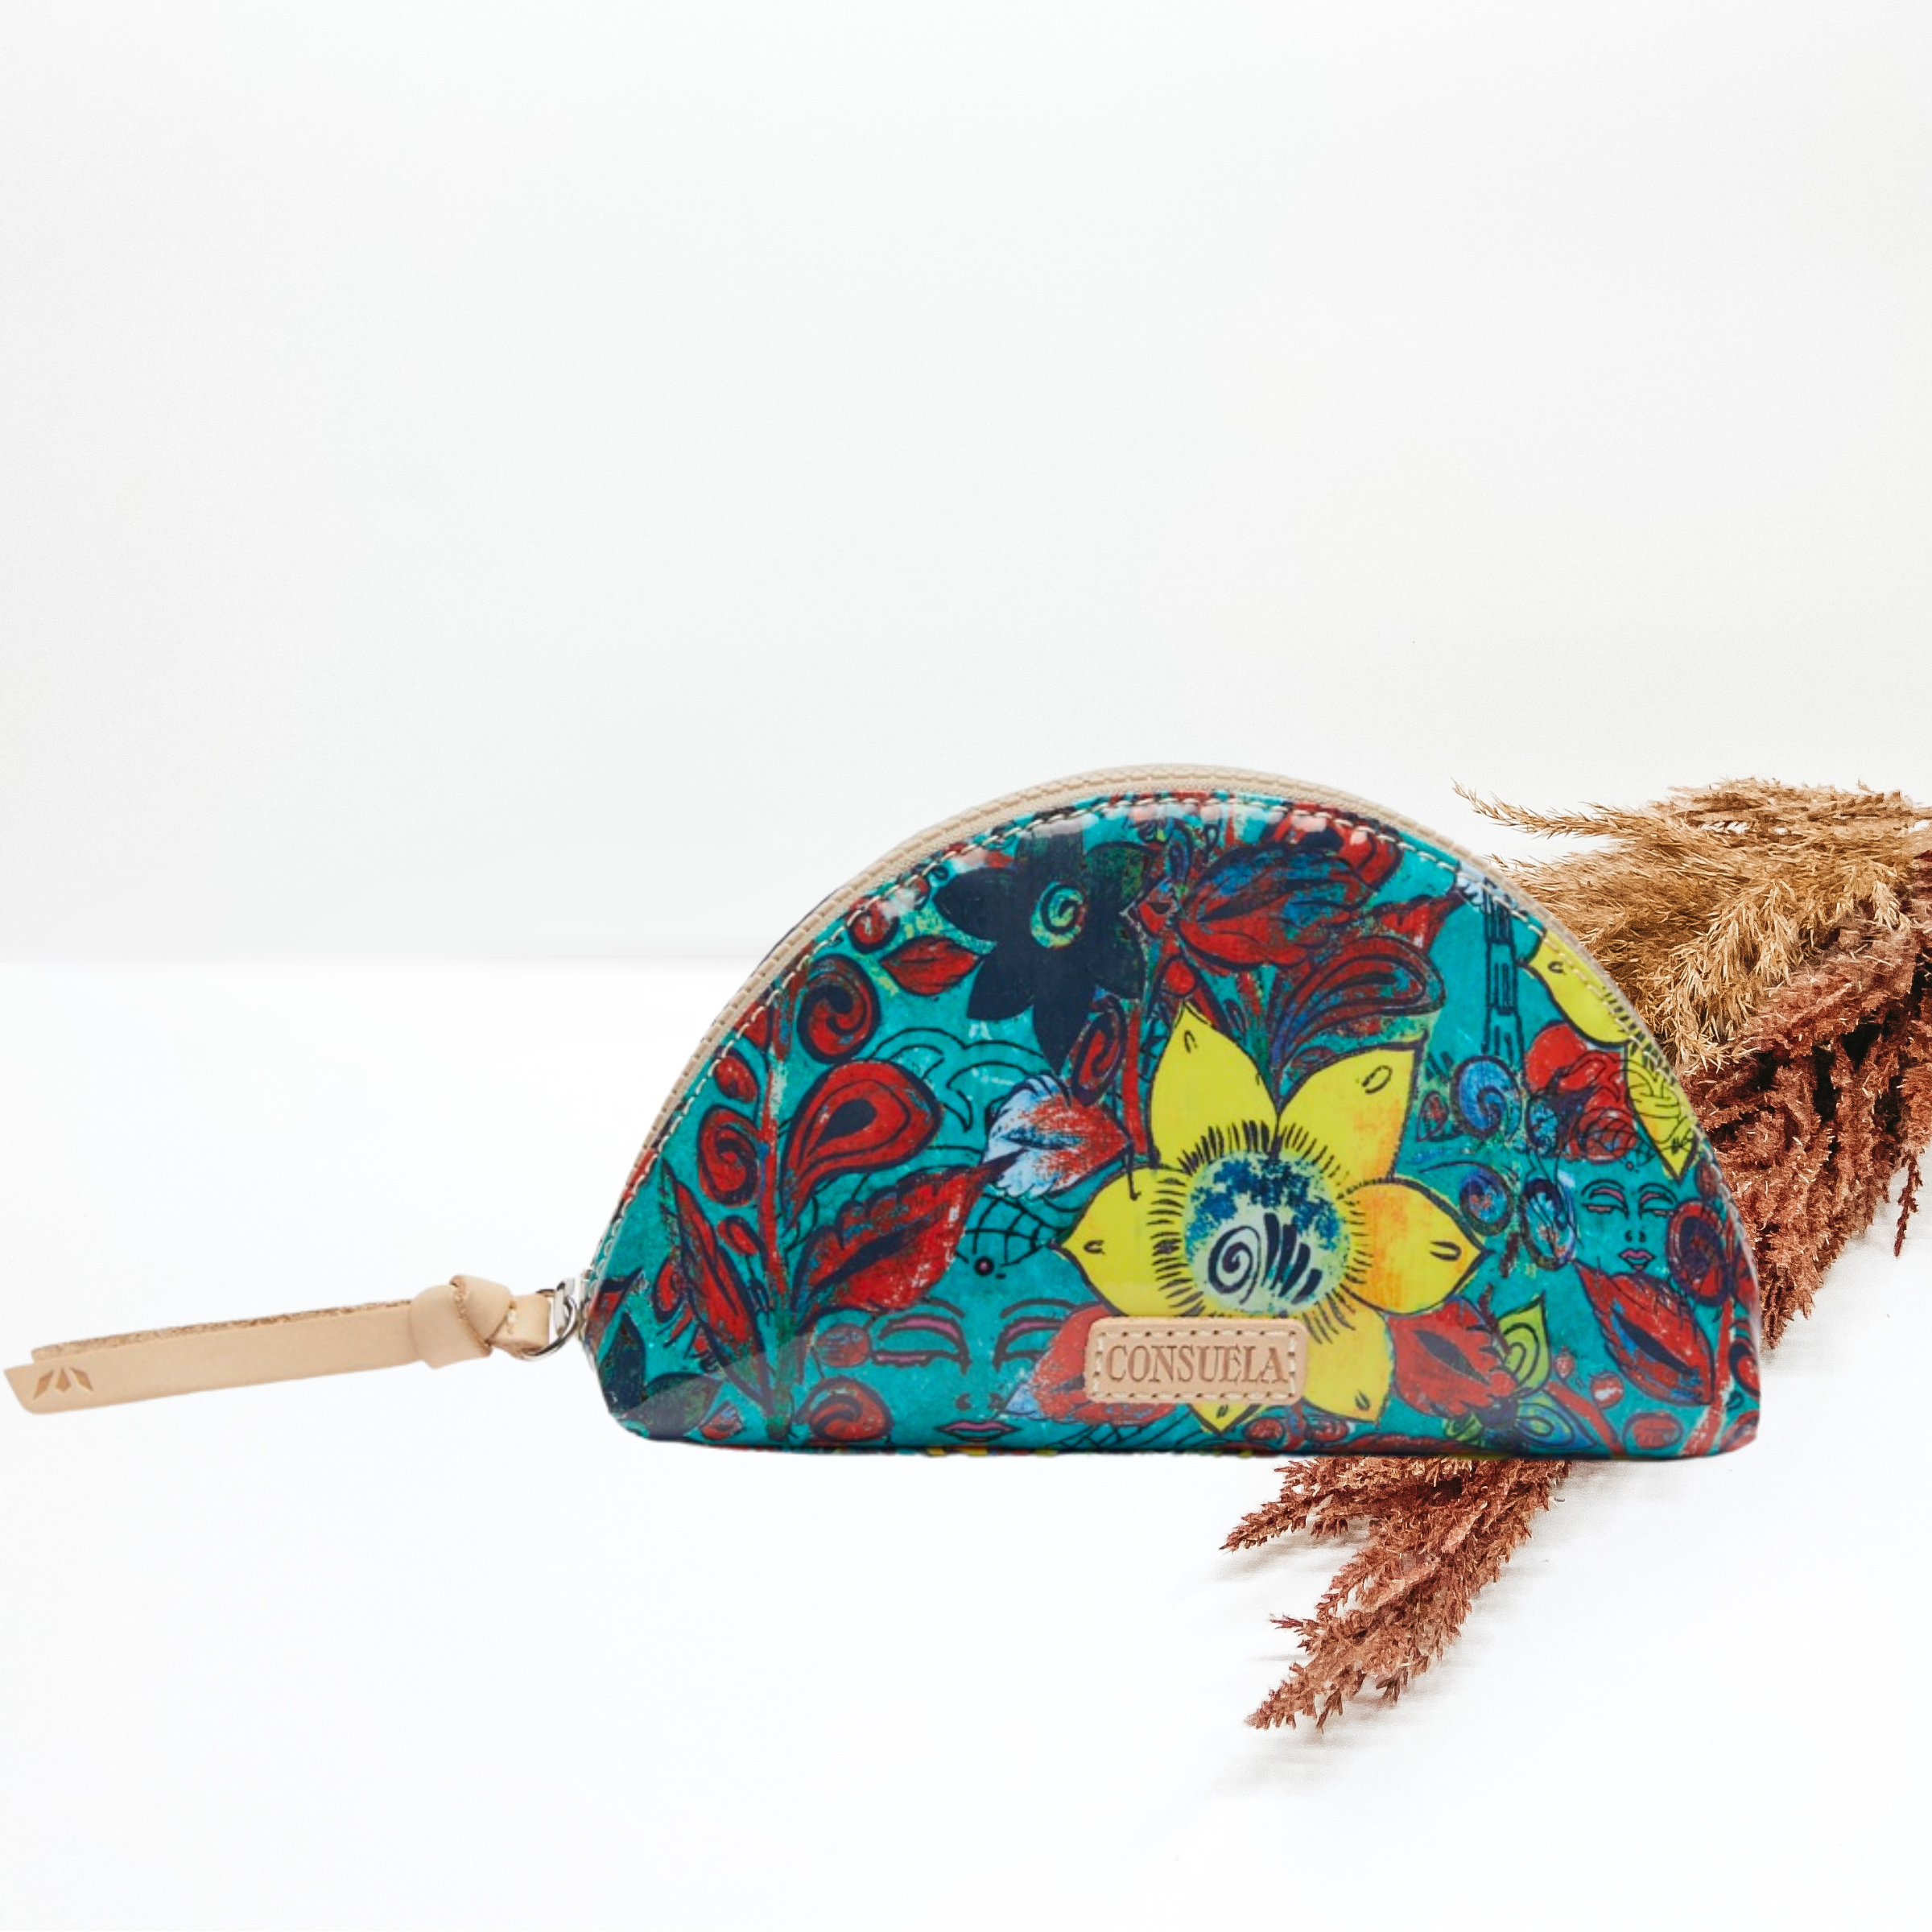 Pictured is a dome shaped cosmetic bag. This is a blue bag with a navy, yellow, and red print design. It also includes a top zipper. This purse is pictured on a white background with pompous grass on the right side of the picture.